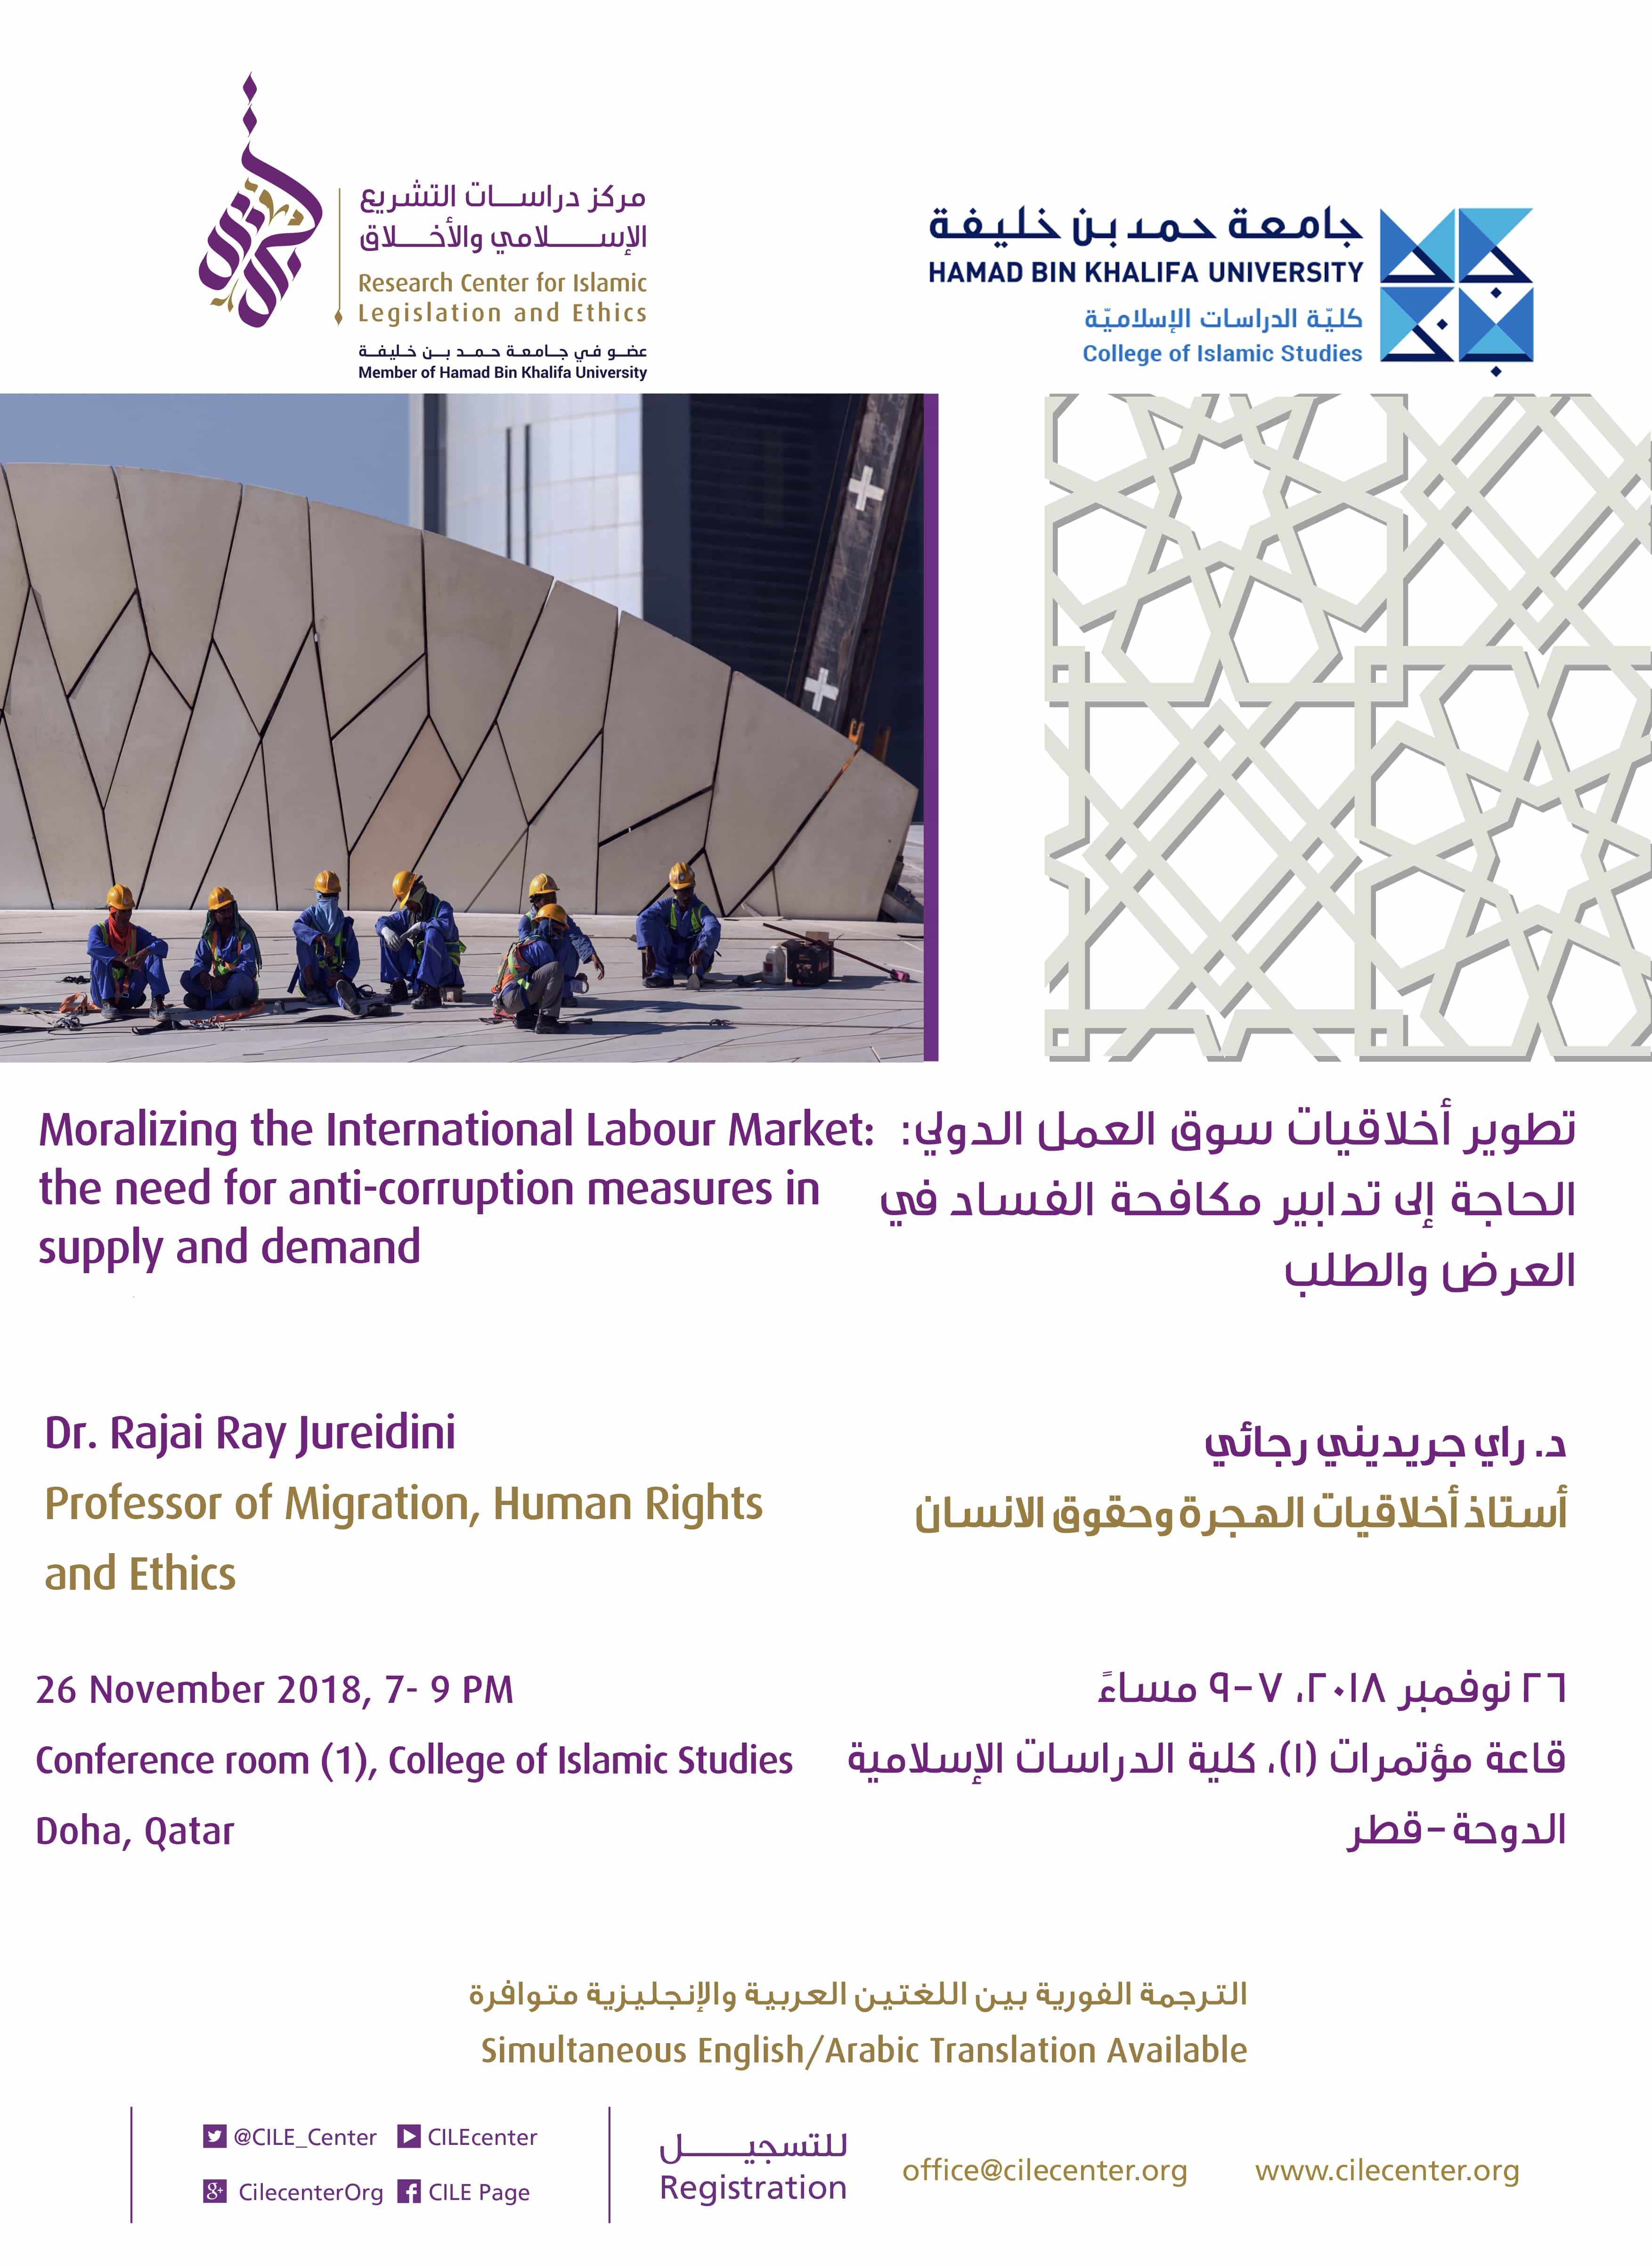 Lecture “Moralizing the International Labour Market: the need for anti-corruption measures in supply and demand”